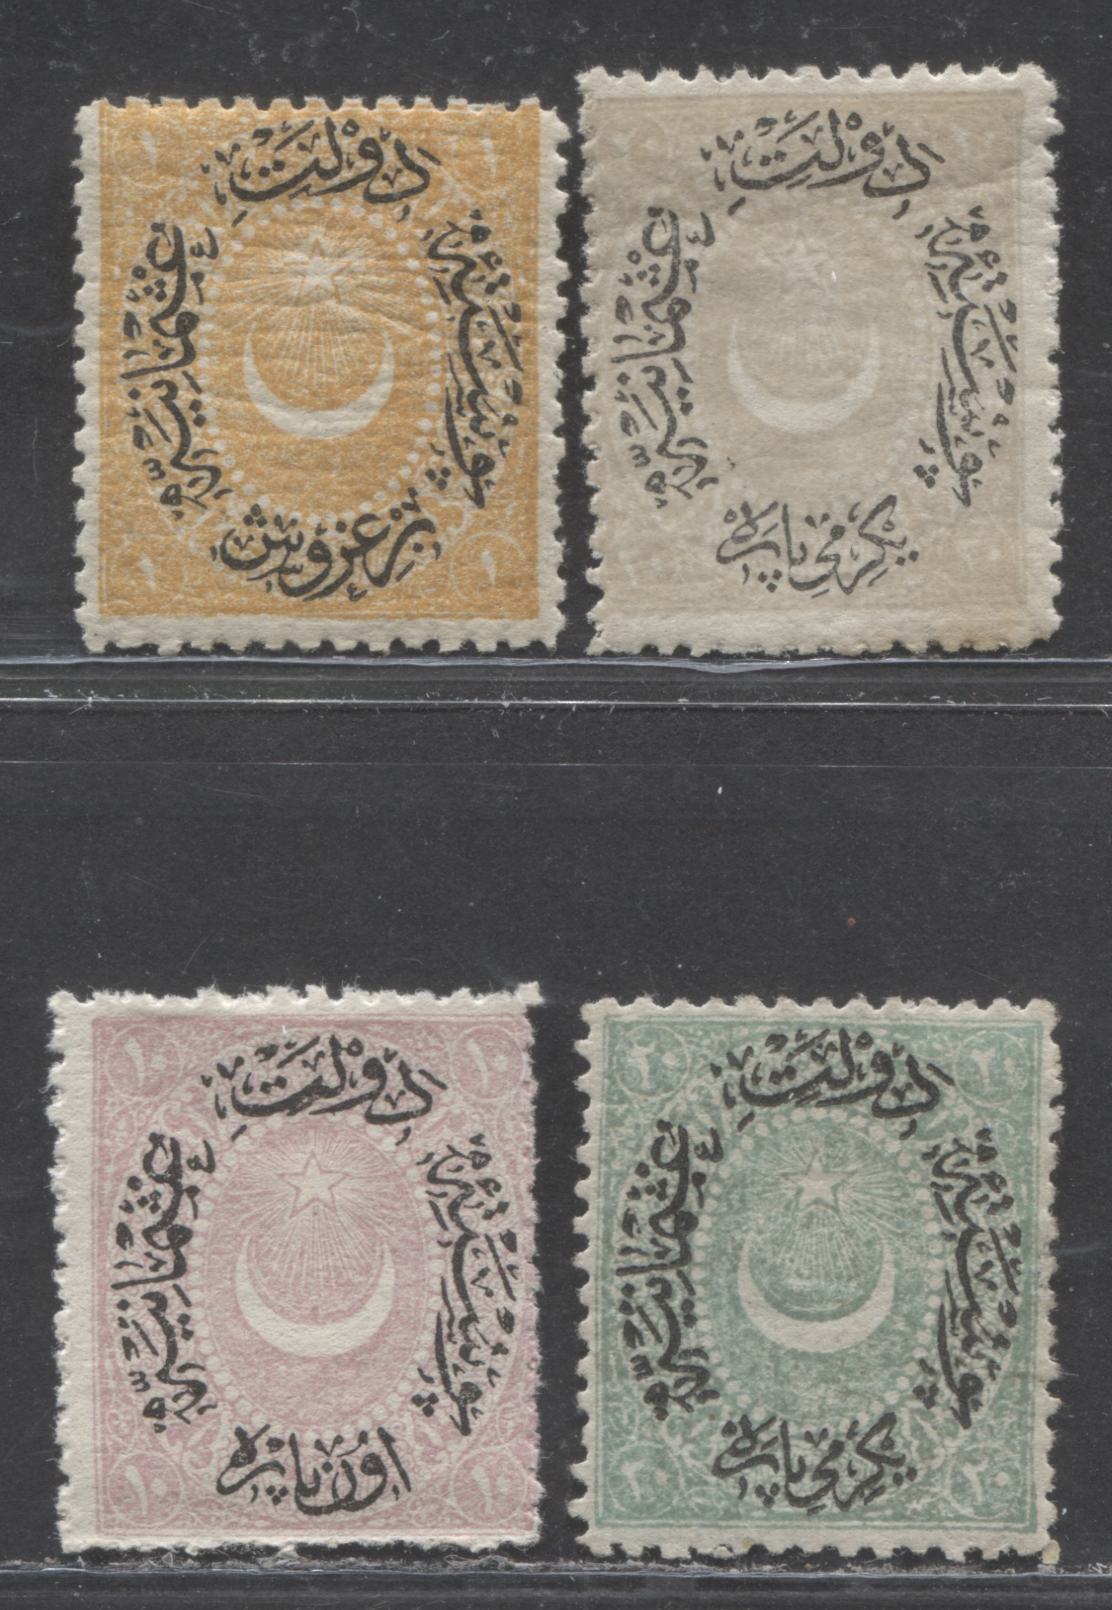 Lot 99 Turkey SC#44/64 1876 Definitives, Perf 13.5, 4 VG/F OG & Unused Singles, Click on Listing to See ALL Pictures, Estimated Value $5 USD